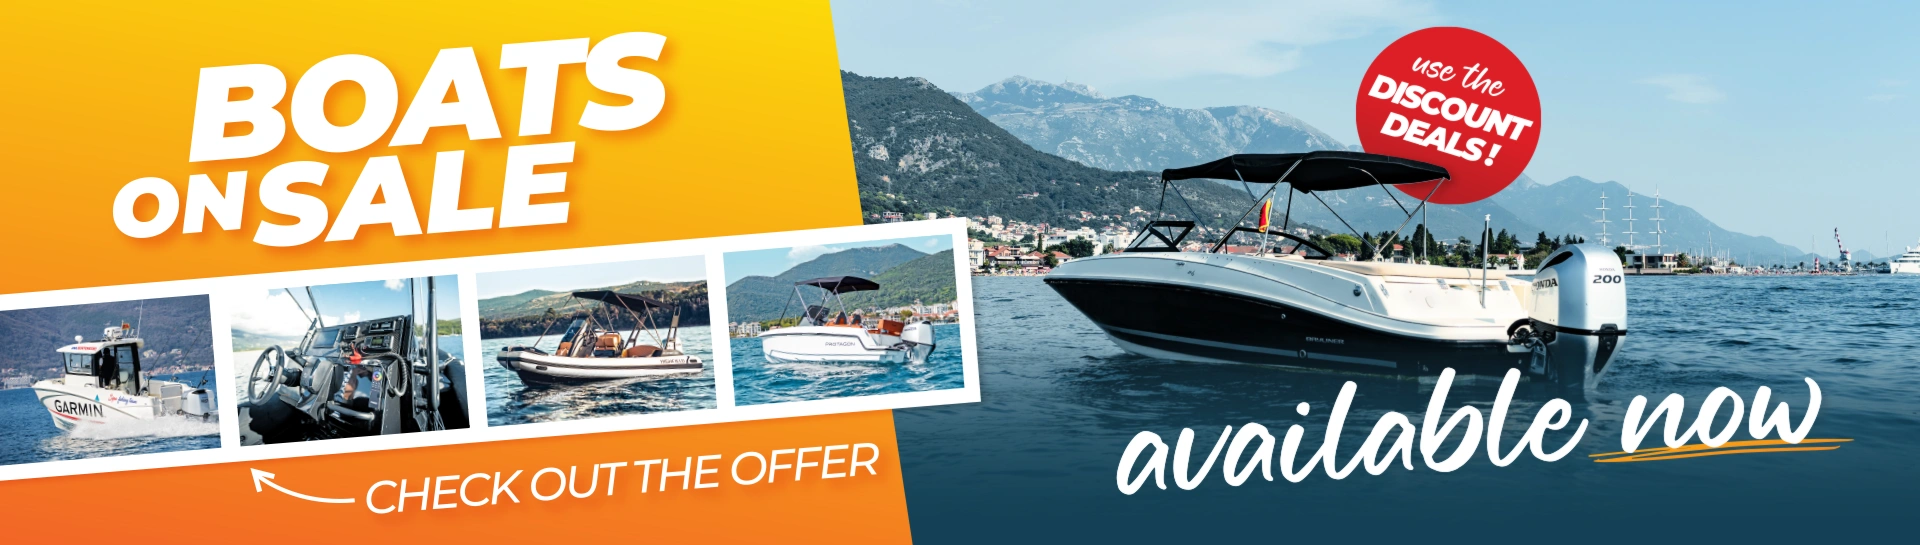 boats on sale discount prices available now montenegro